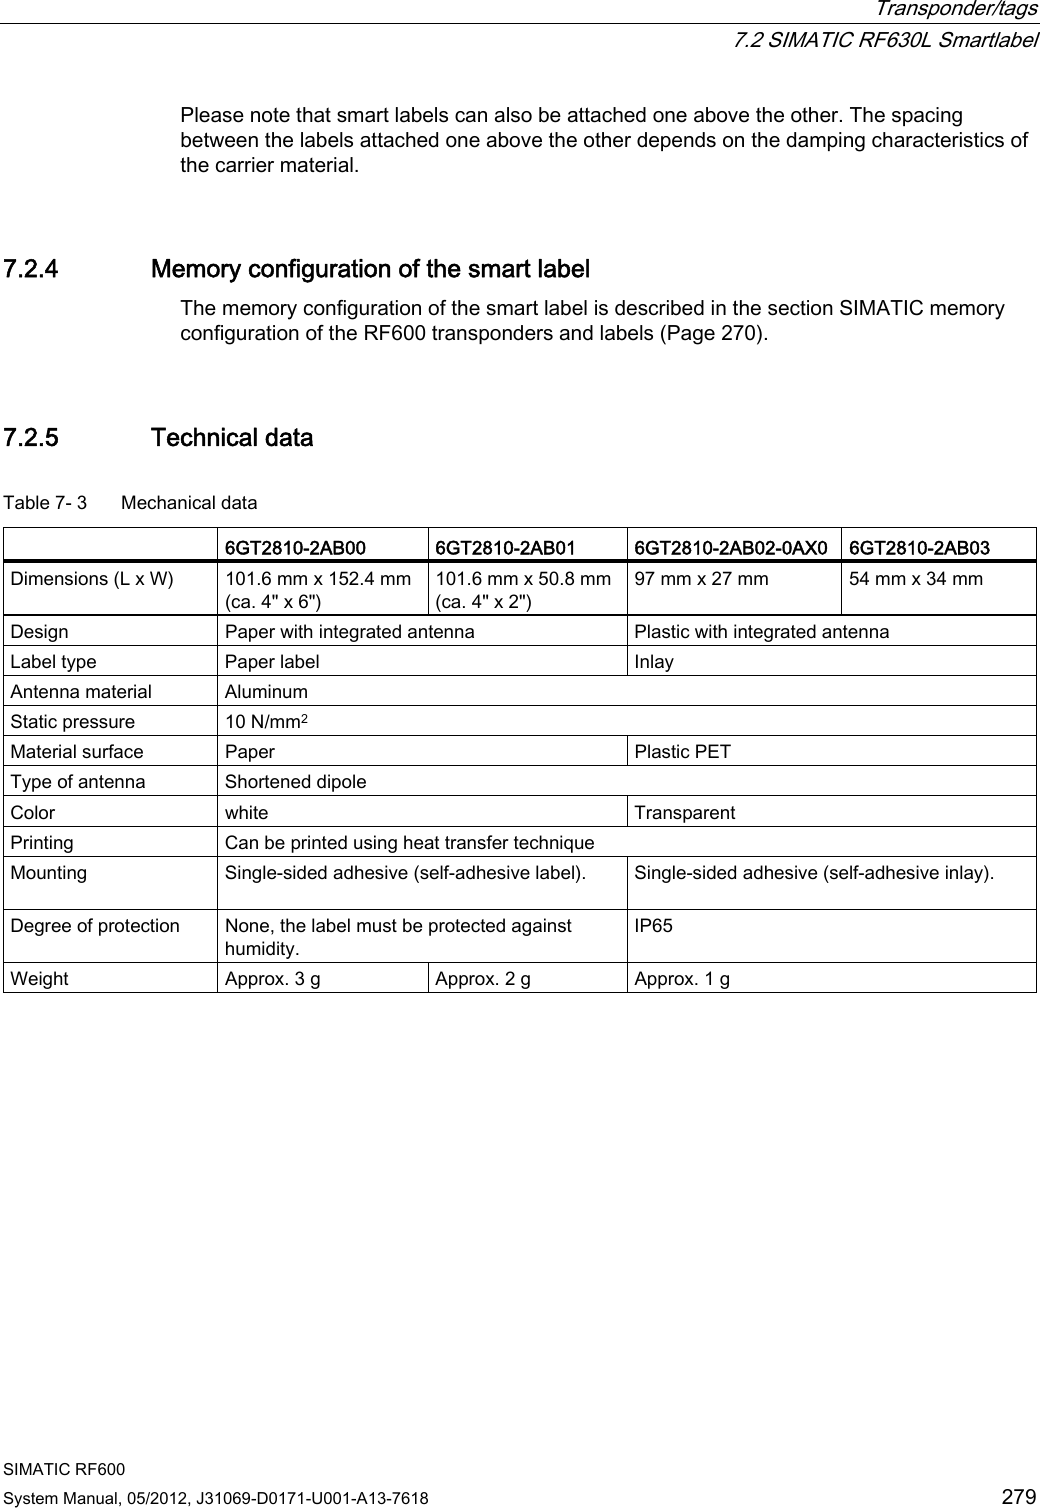  Transponder/tags  7.2 SIMATIC RF630L Smartlabel SIMATIC RF600 System Manual, 05/2012, J31069-D0171-U001-A13-7618  279 Please note that smart labels can also be attached one above the other. The spacing between the labels attached one above the other depends on the damping characteristics of the carrier material. 7.2.4 Memory configuration of the smart label The memory configuration of the smart label is described in the section SIMATIC memory configuration of the RF600 transponders and labels (Page 270). 7.2.5 Technical data Table 7- 3  Mechanical data   6GT2810-2AB00  6GT2810-2AB01  6GT2810-2AB02-0AX0  6GT2810-2AB03 Dimensions (L x W)  101.6 mm x 152.4 mm (ca. 4&quot; x 6&quot;) 101.6 mm x 50.8 mm (ca. 4&quot; x 2&quot;) 97 mm x 27 mm  54 mm x 34 mm Design  Paper with integrated antenna  Plastic with integrated antenna Label type  Paper label  Inlay Antenna material  Aluminum Static pressure  10 N/mm2 Material surface  Paper  Plastic PET Type of antenna  Shortened dipole  Color  white  Transparent Printing  Can be printed using heat transfer technique Mounting  Single-sided adhesive (self-adhesive label).  Single-sided adhesive (self-adhesive inlay). Degree of protection  None, the label must be protected against humidity. IP65 Weight  Approx. 3 g  Approx. 2 g  Approx. 1 g  